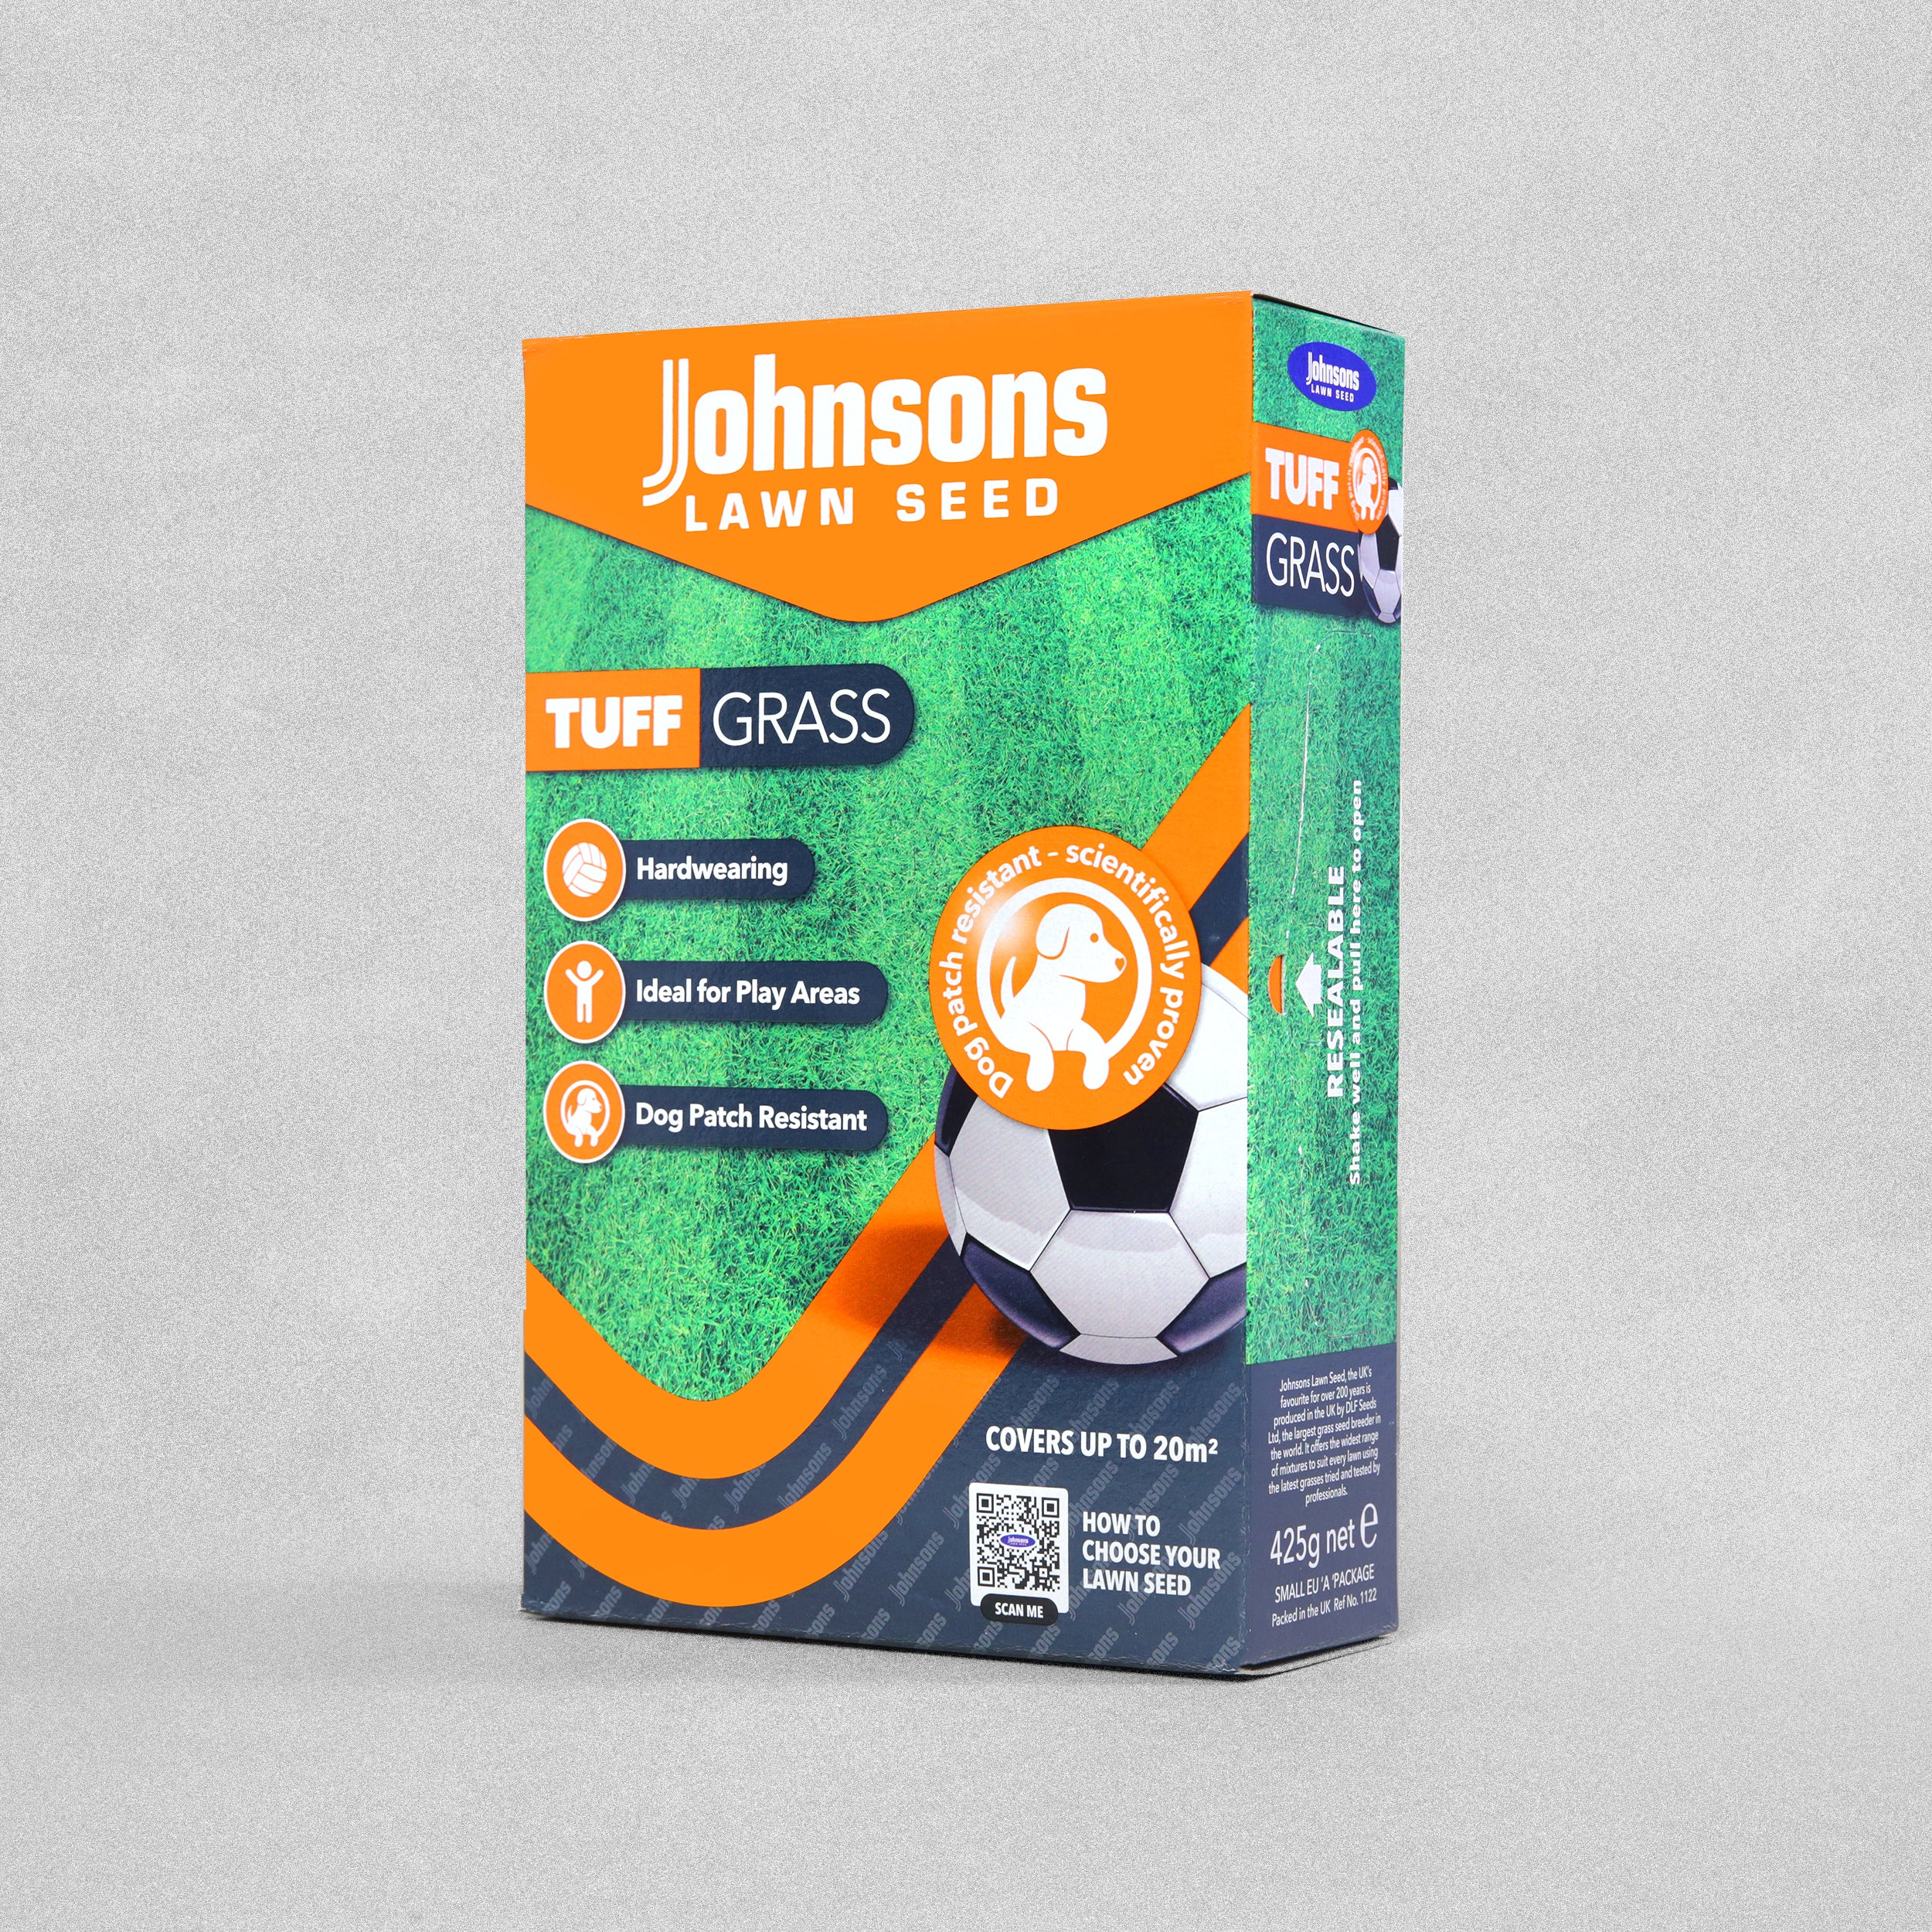 Johnsons Lawn Seed Tuff Grass 425g - 20m2 Coverage